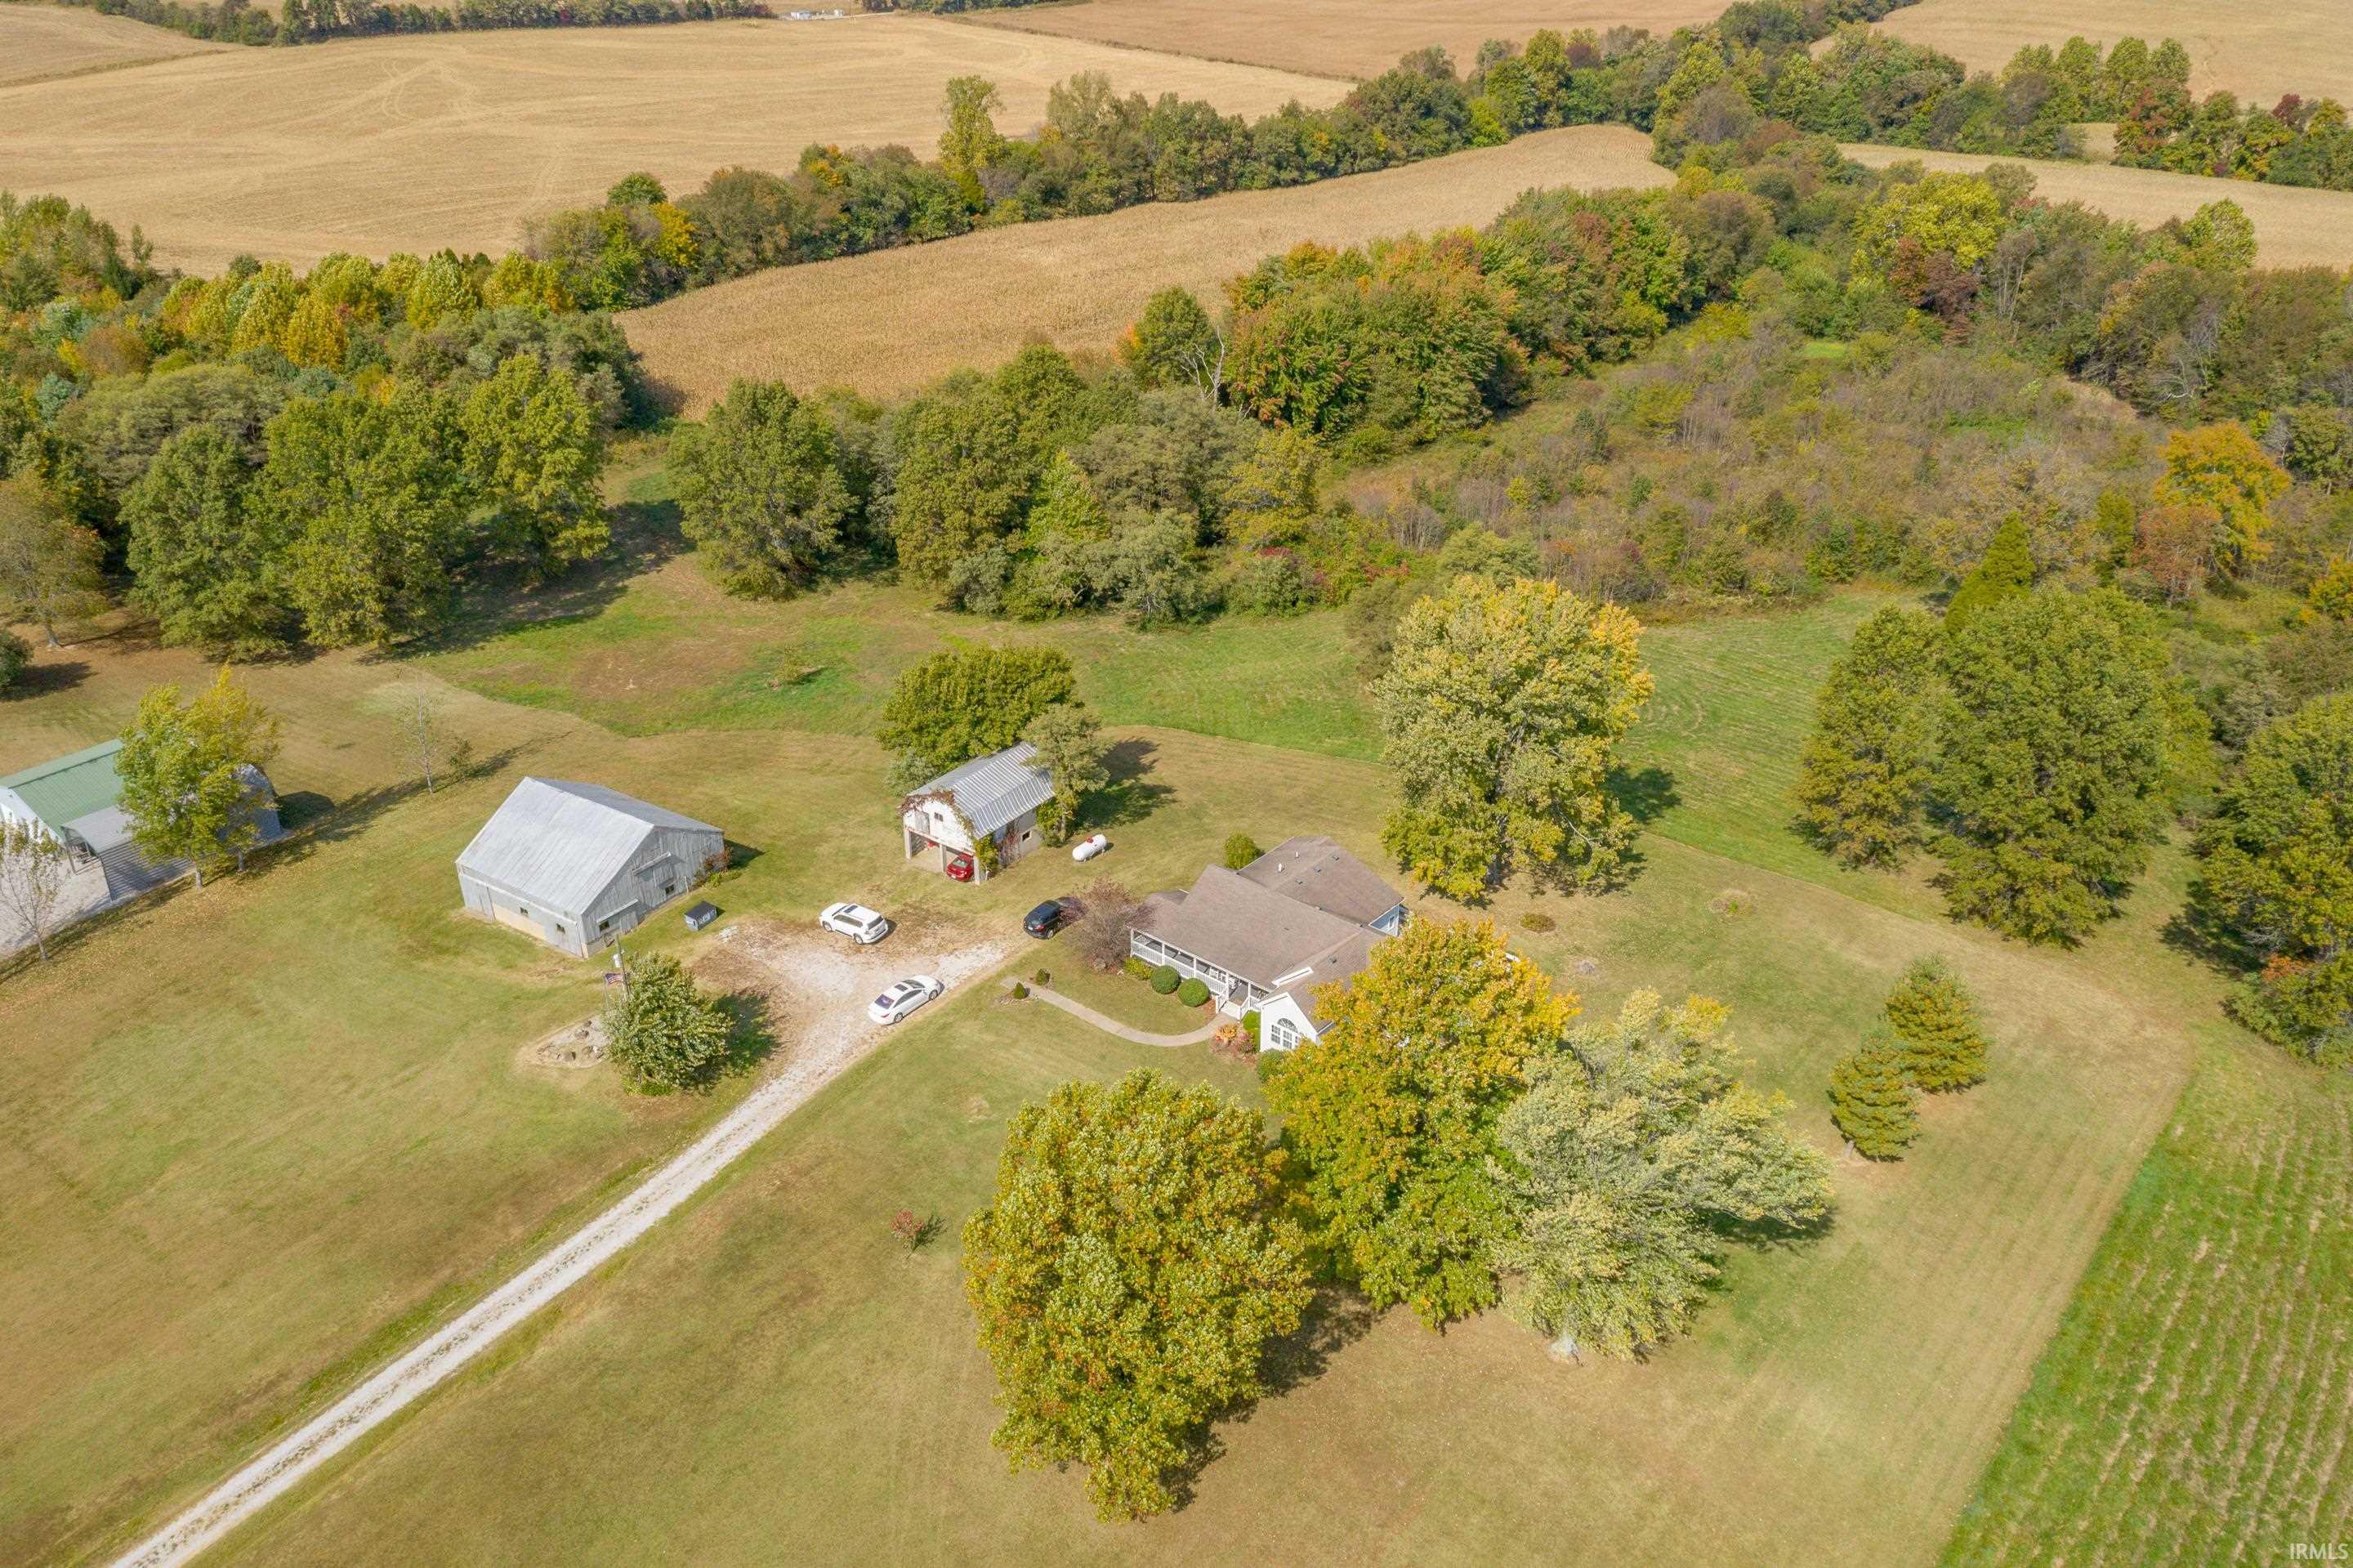 23 ACRES OF OPEN LAND